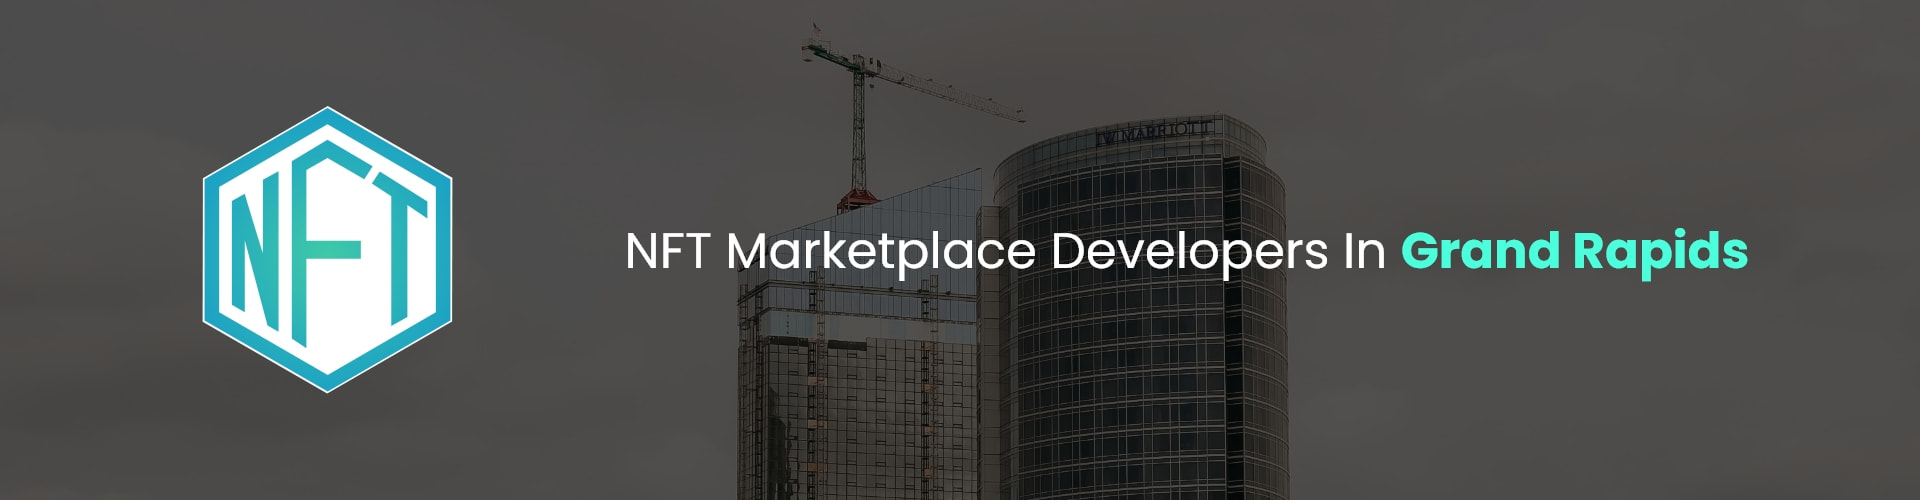 hire nft marketplace developers in grand rapids